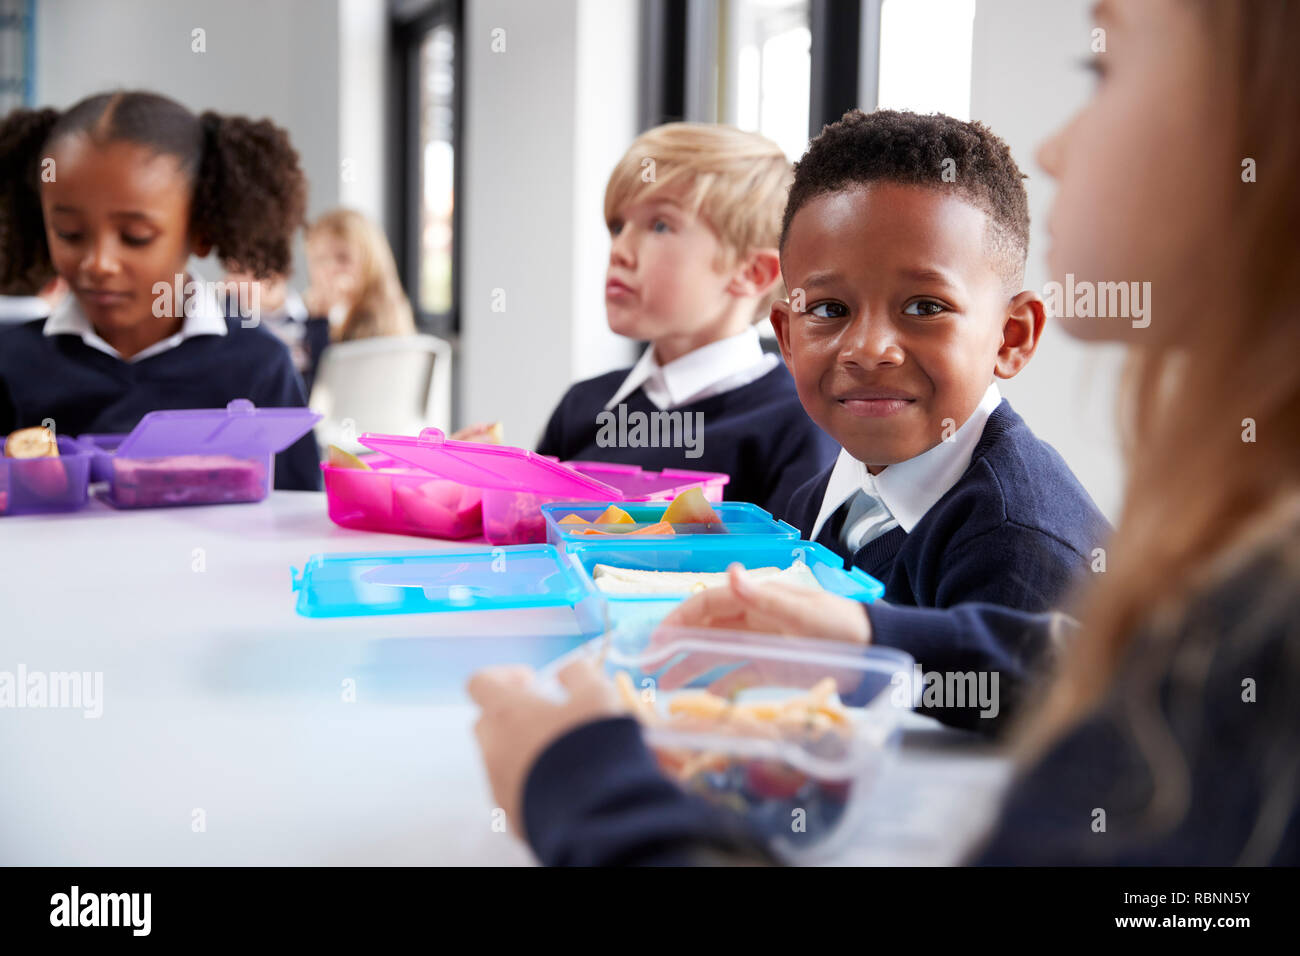 Smiling primary school kids sitting at a table eating their packed lunches together, selective focus Stock Photo